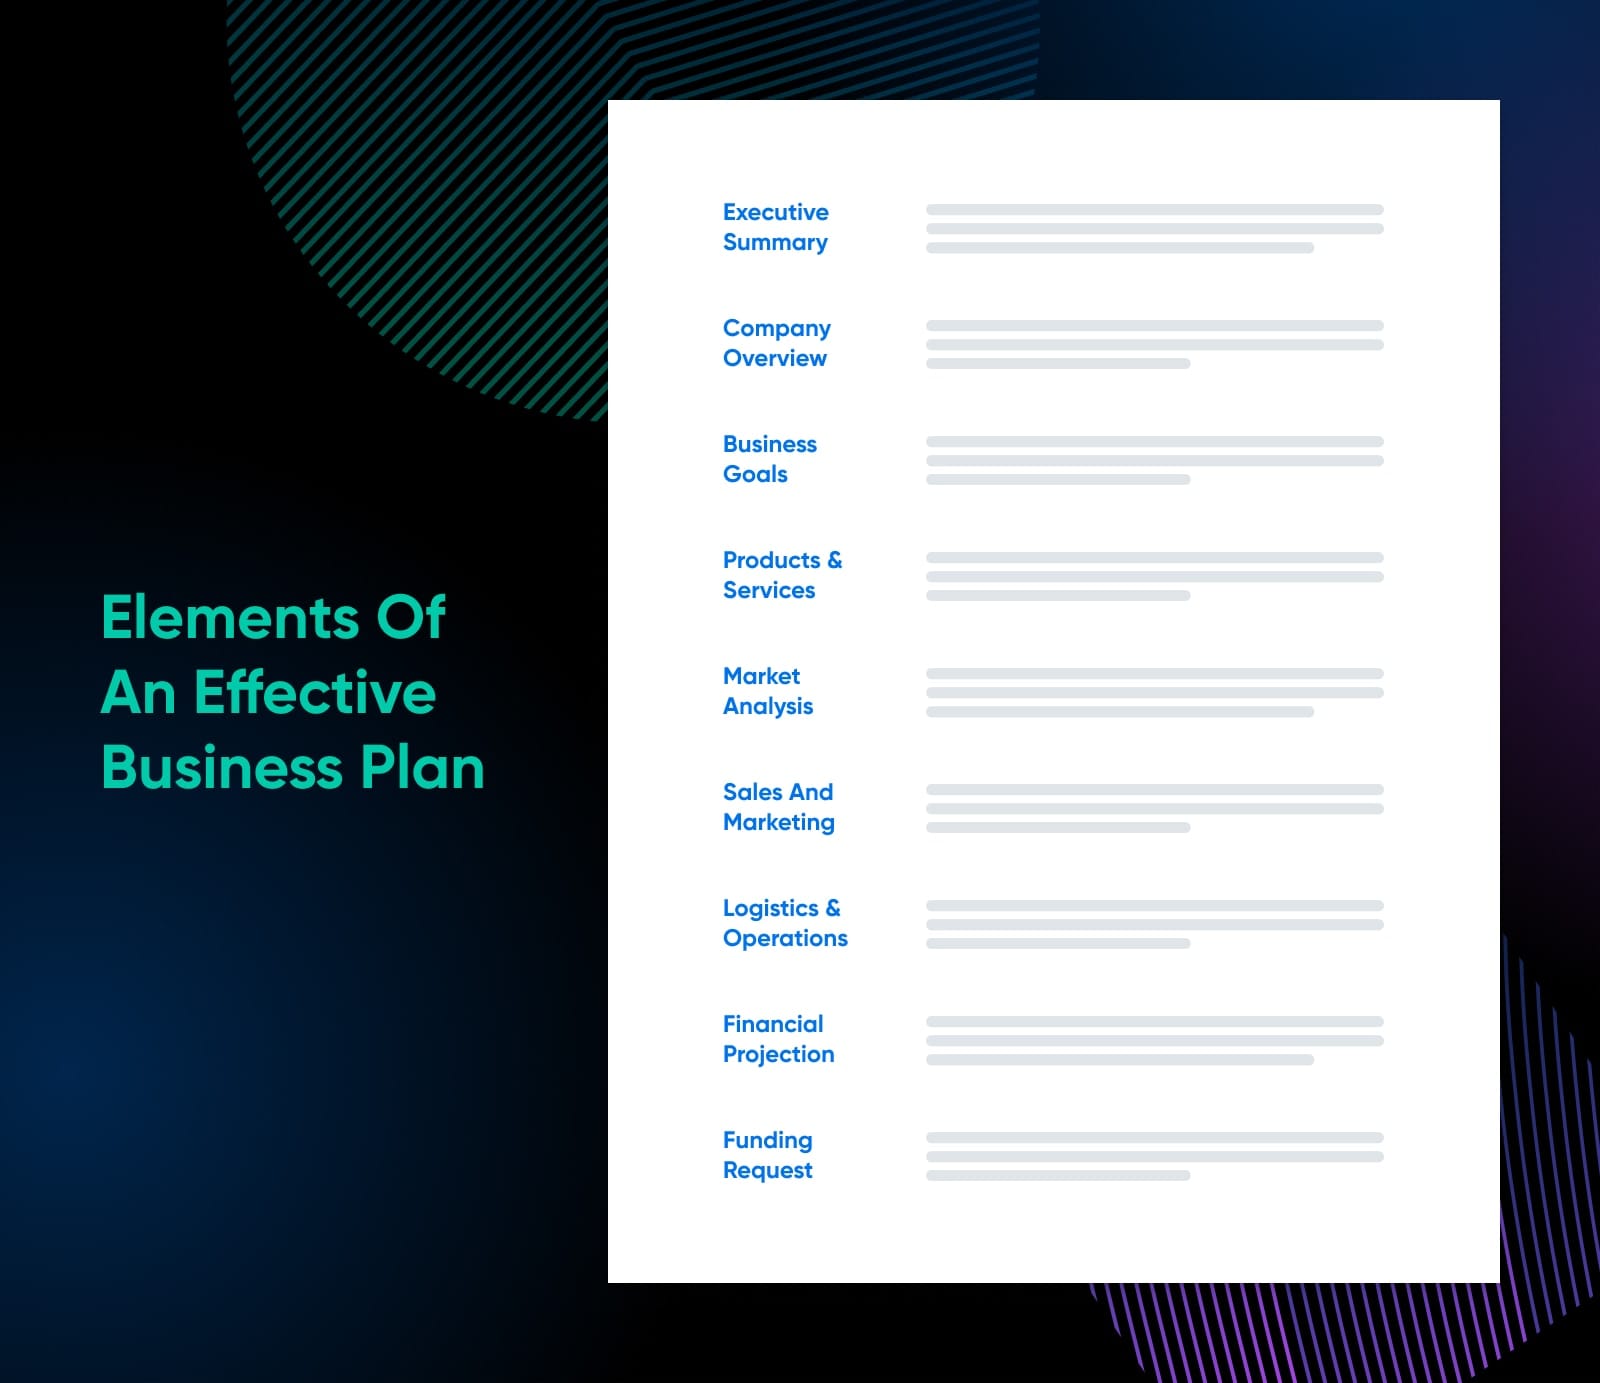 "Elements Of An Effective Business Plan" on the left, and a mock-up of a plan with subheadings on the right. 